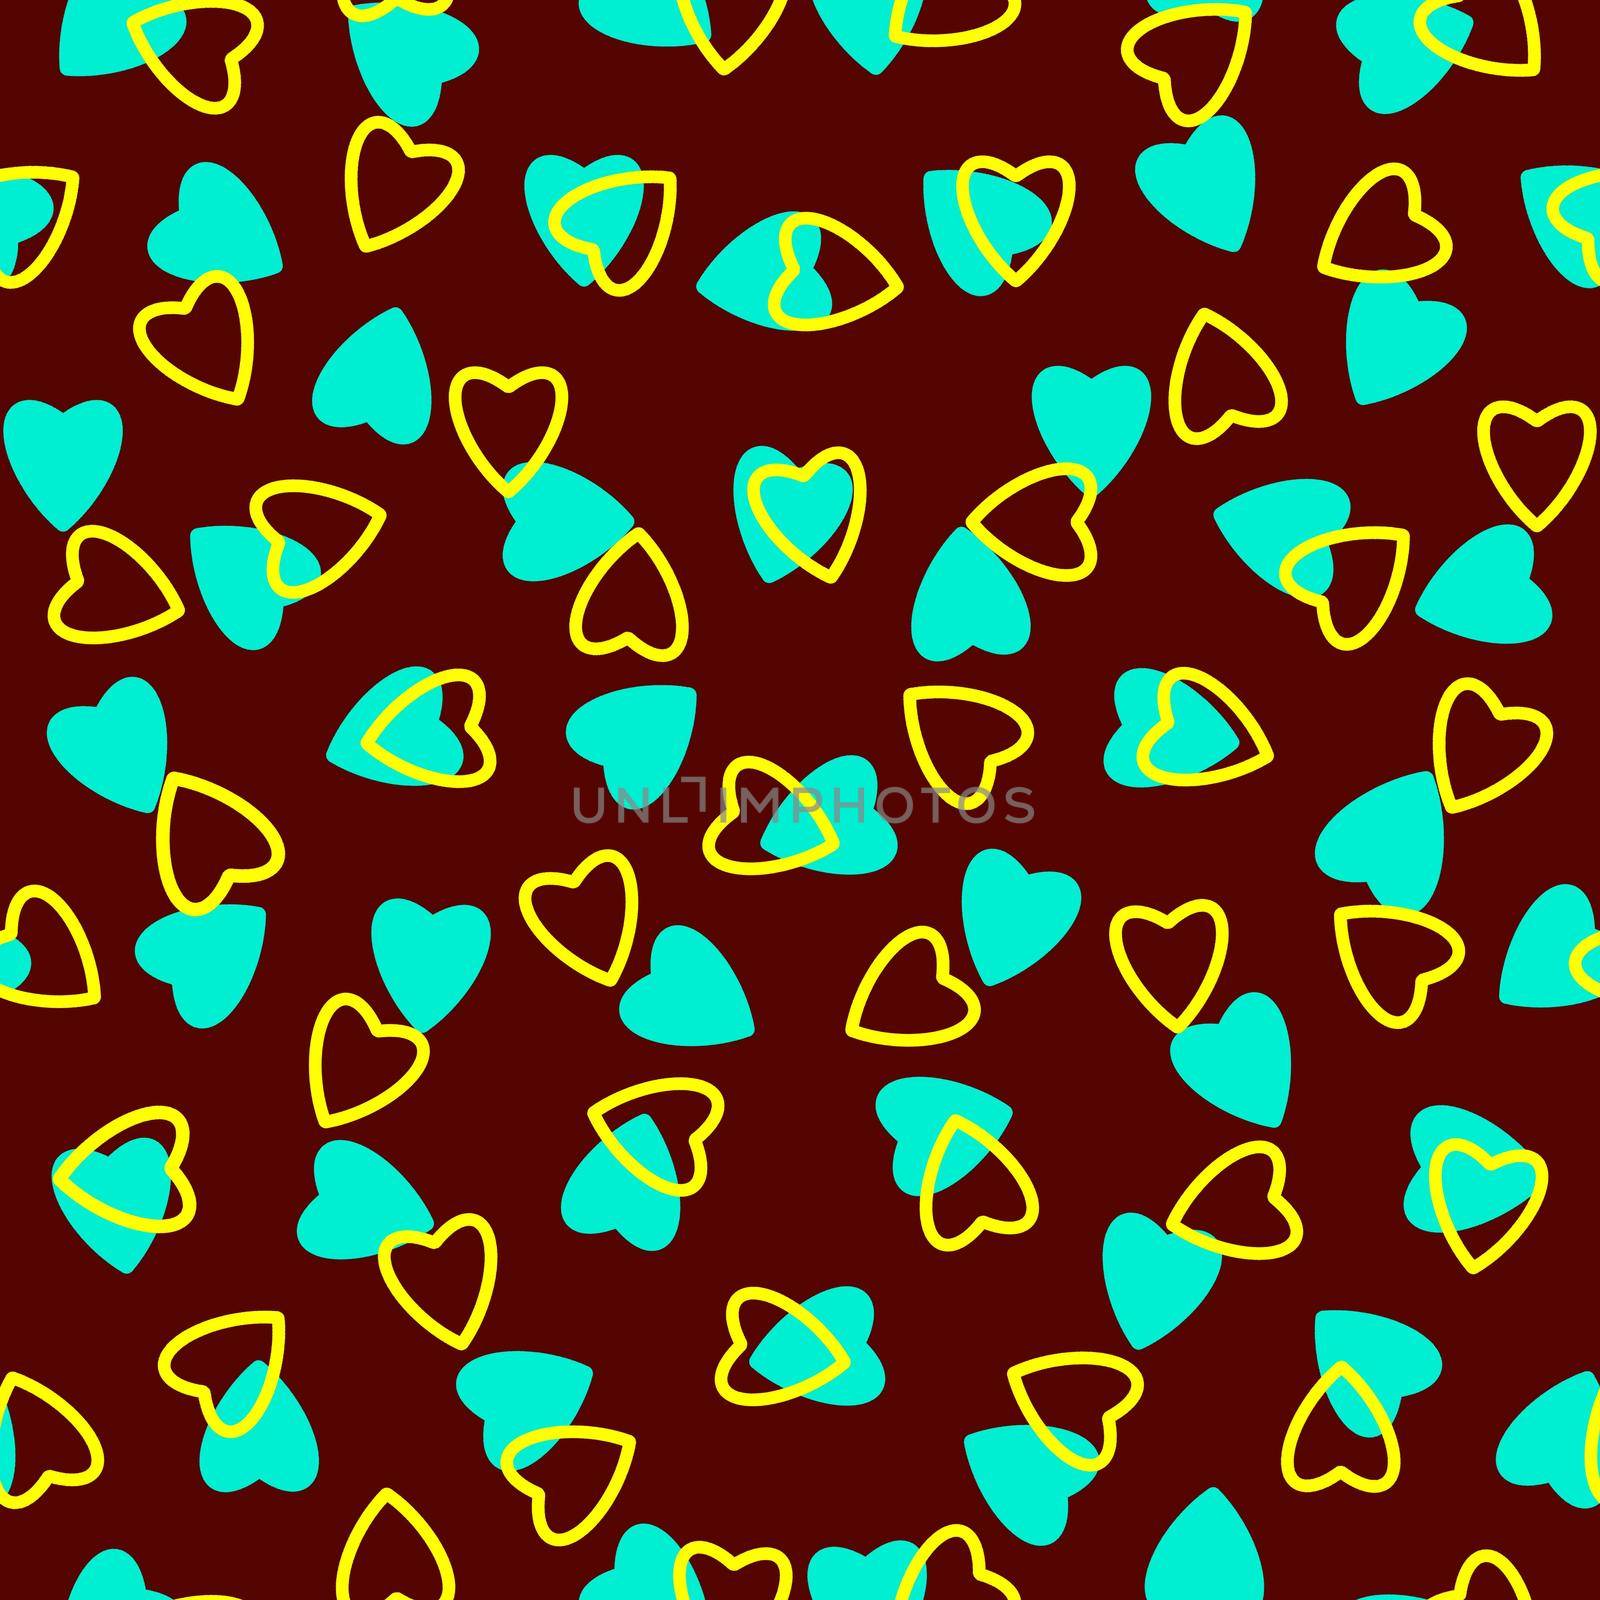 Simple heart seamless pattern,endless chaotic texture made tiny heart silhouettes.Valentines,mothers day background.Great for Easter,wedding,scrapbook, wrapping paper,textiles.Azure,yellow,burgundy by Angelsmoon